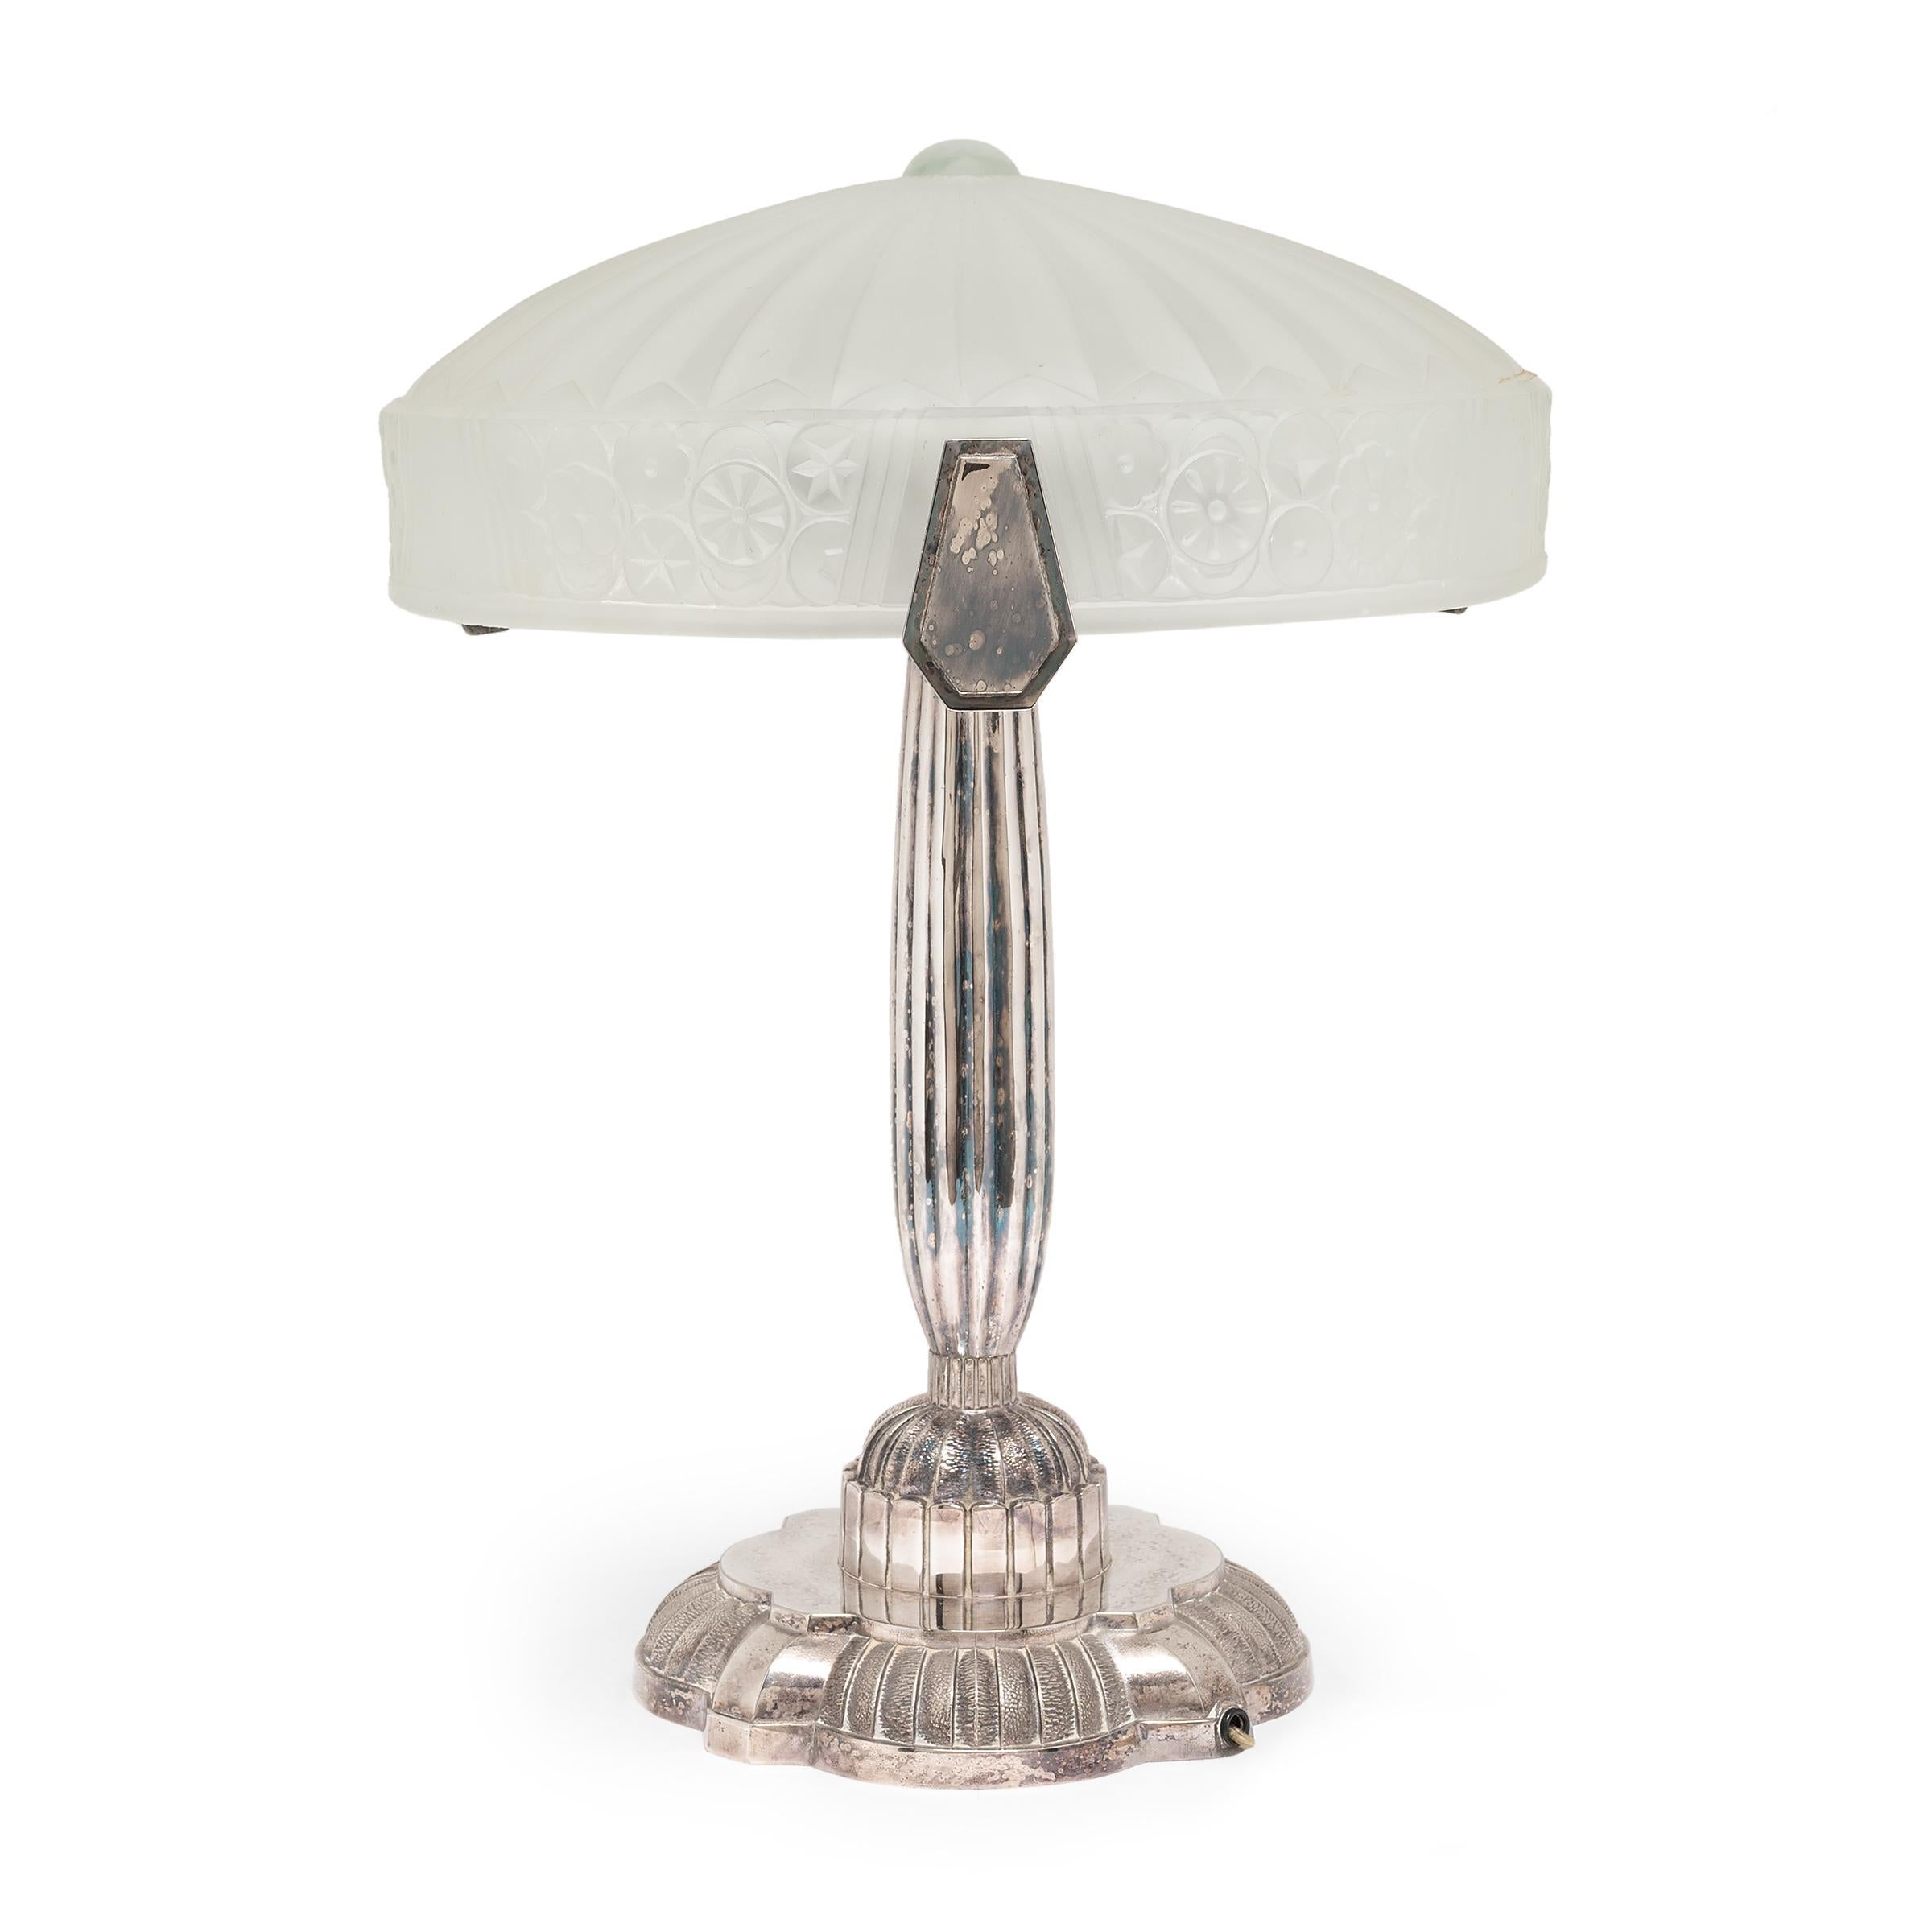 These frosted glass table lamps are mid-century reproductions of the elaborate French Art Deco light fixtures of the early 20th century. Embossed with the Crazy Queen trademark, the chic lamps recreate the Art Deco style with plated metal bodies and